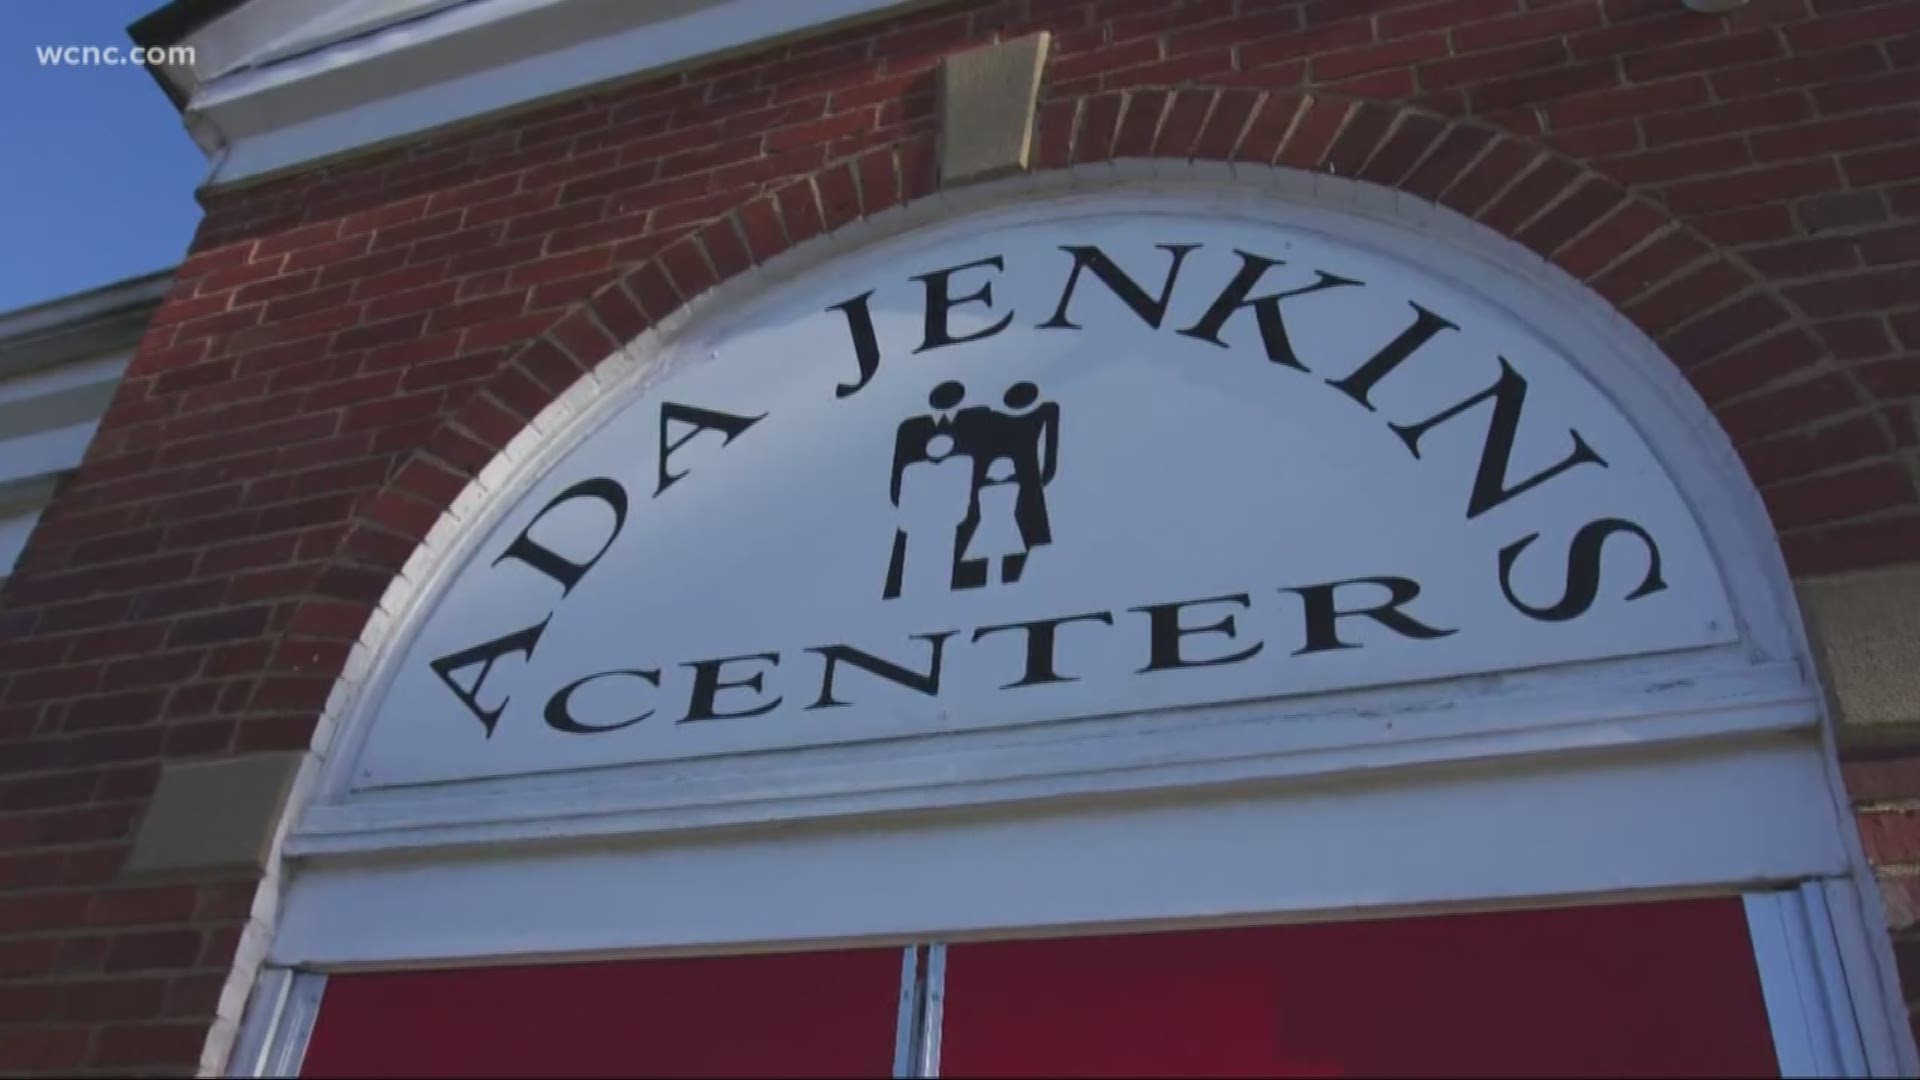 The Ada Jenkins Center in Charlotte helps the impoverished achieve economic independence. Here’s more about their mission and how you can help.